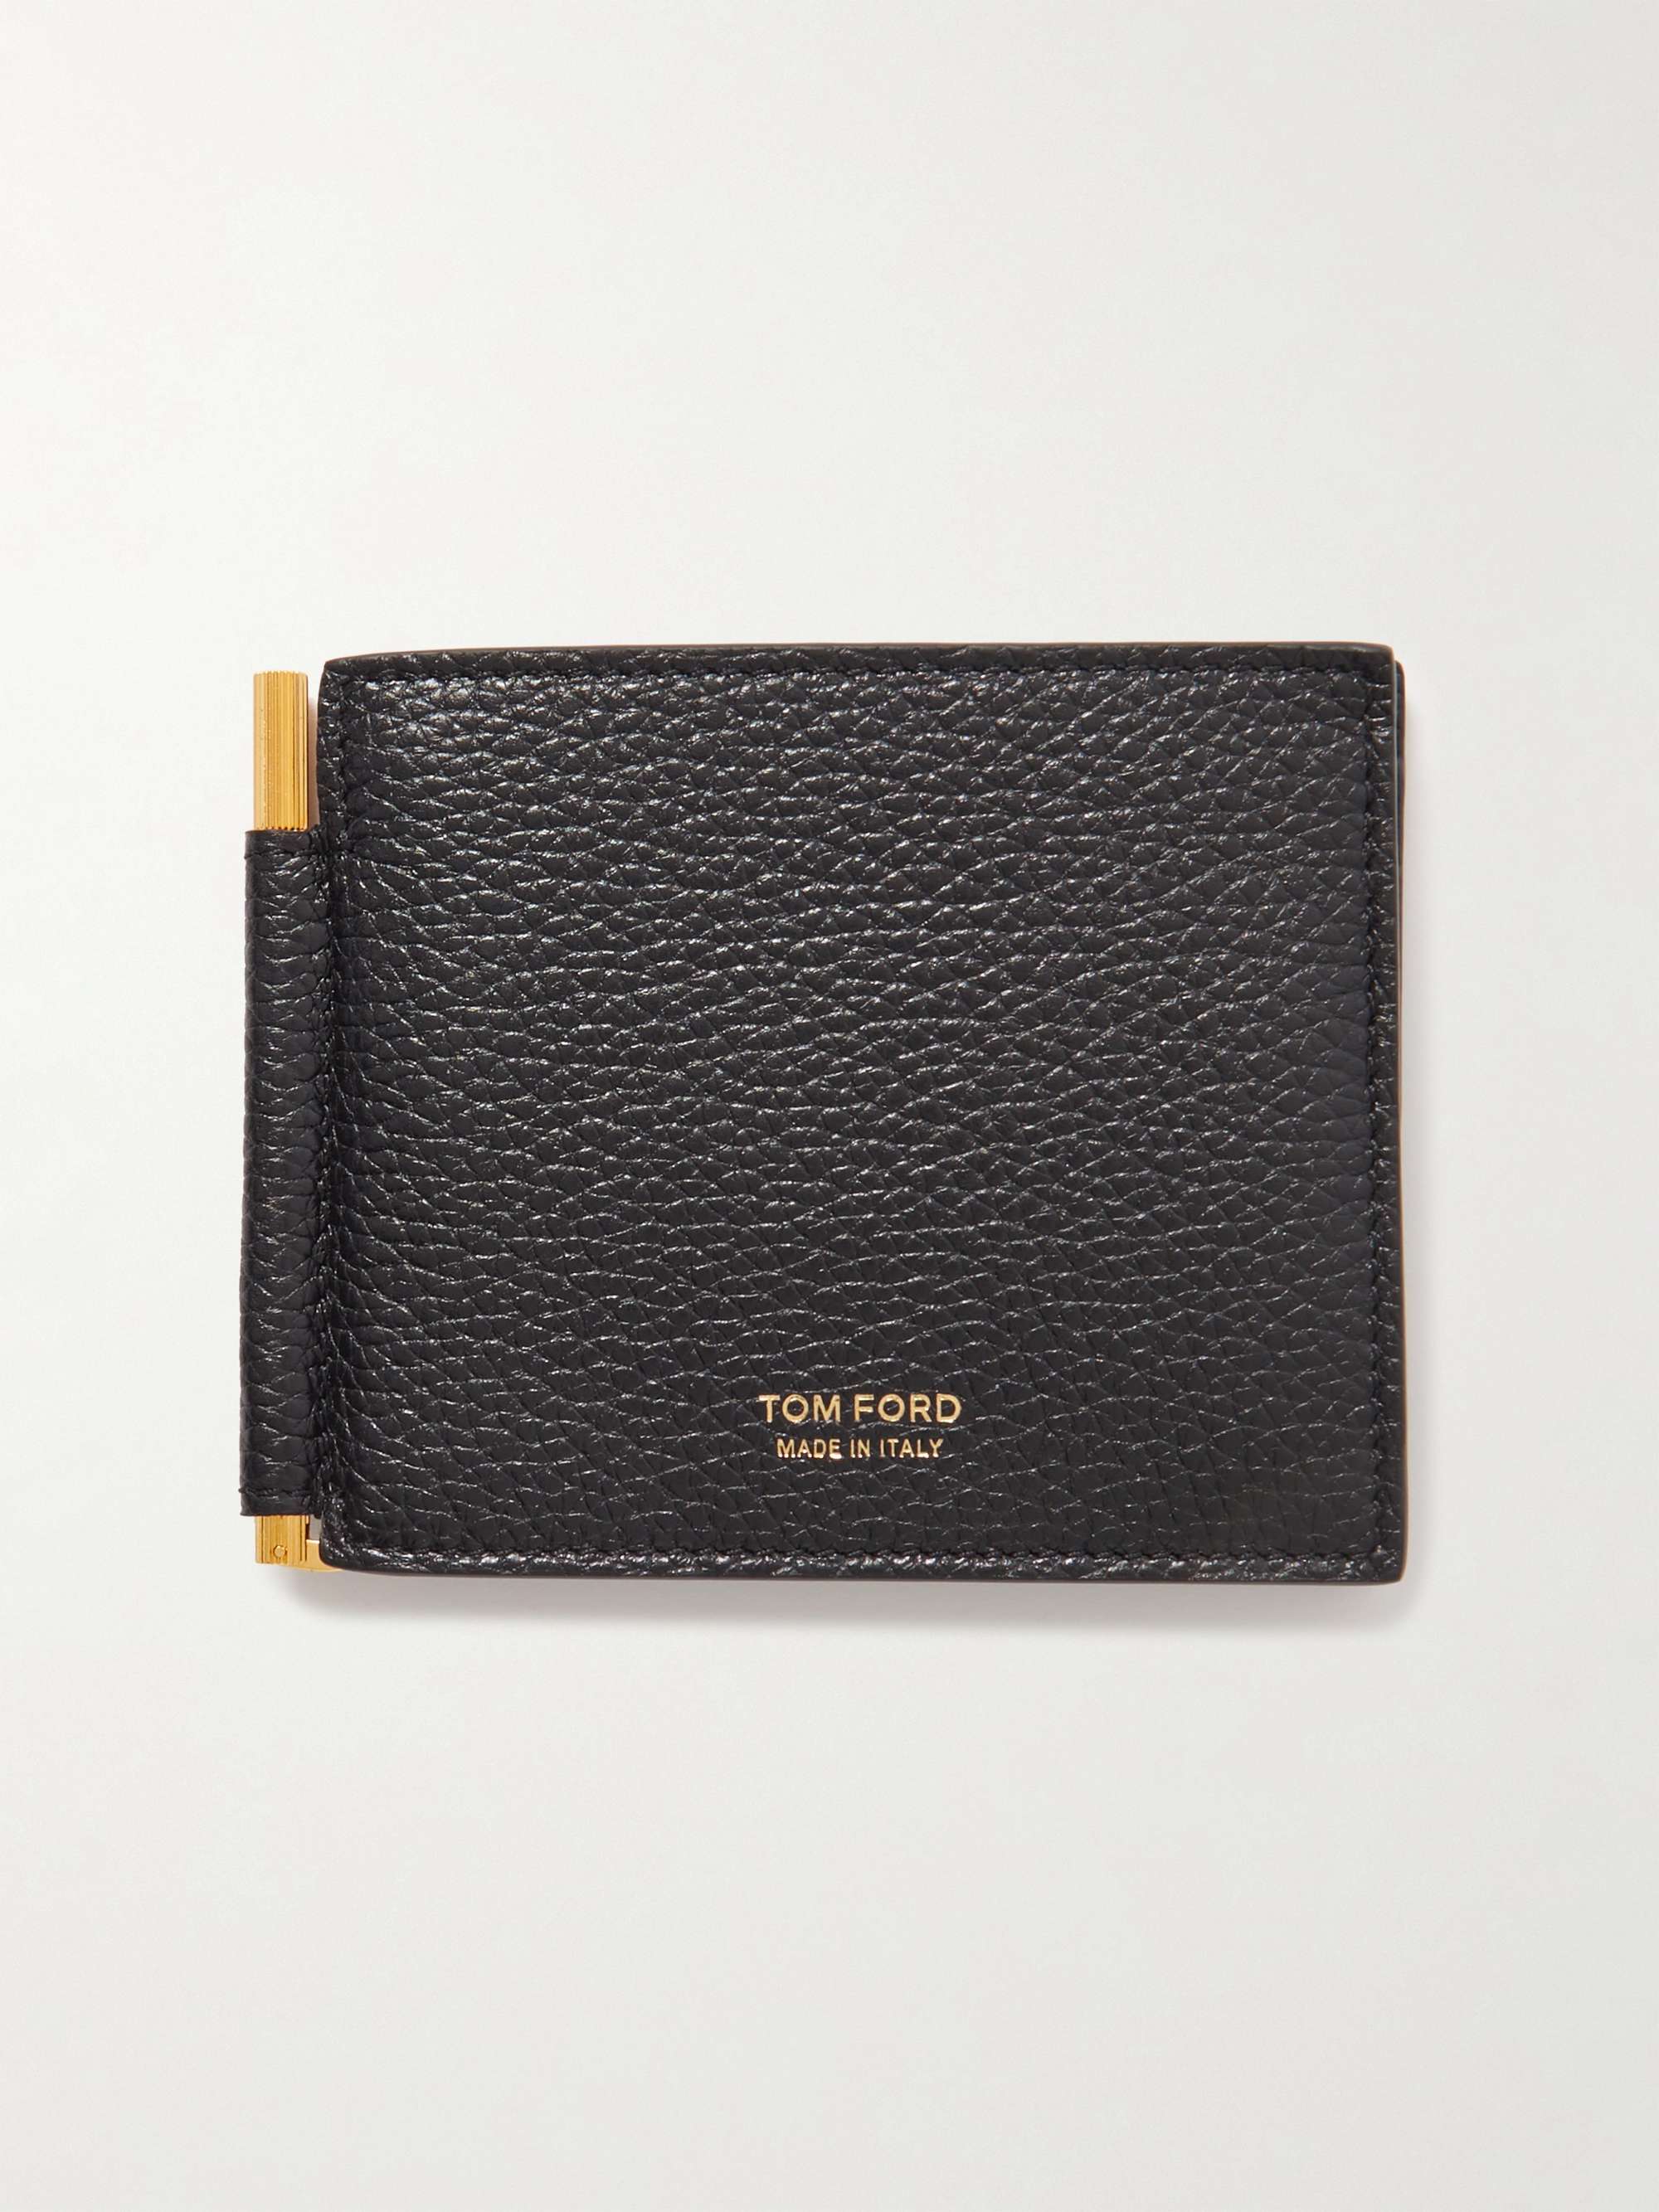 TOM FORD Full-Grain Leather Billfold Wallet with Money Clip